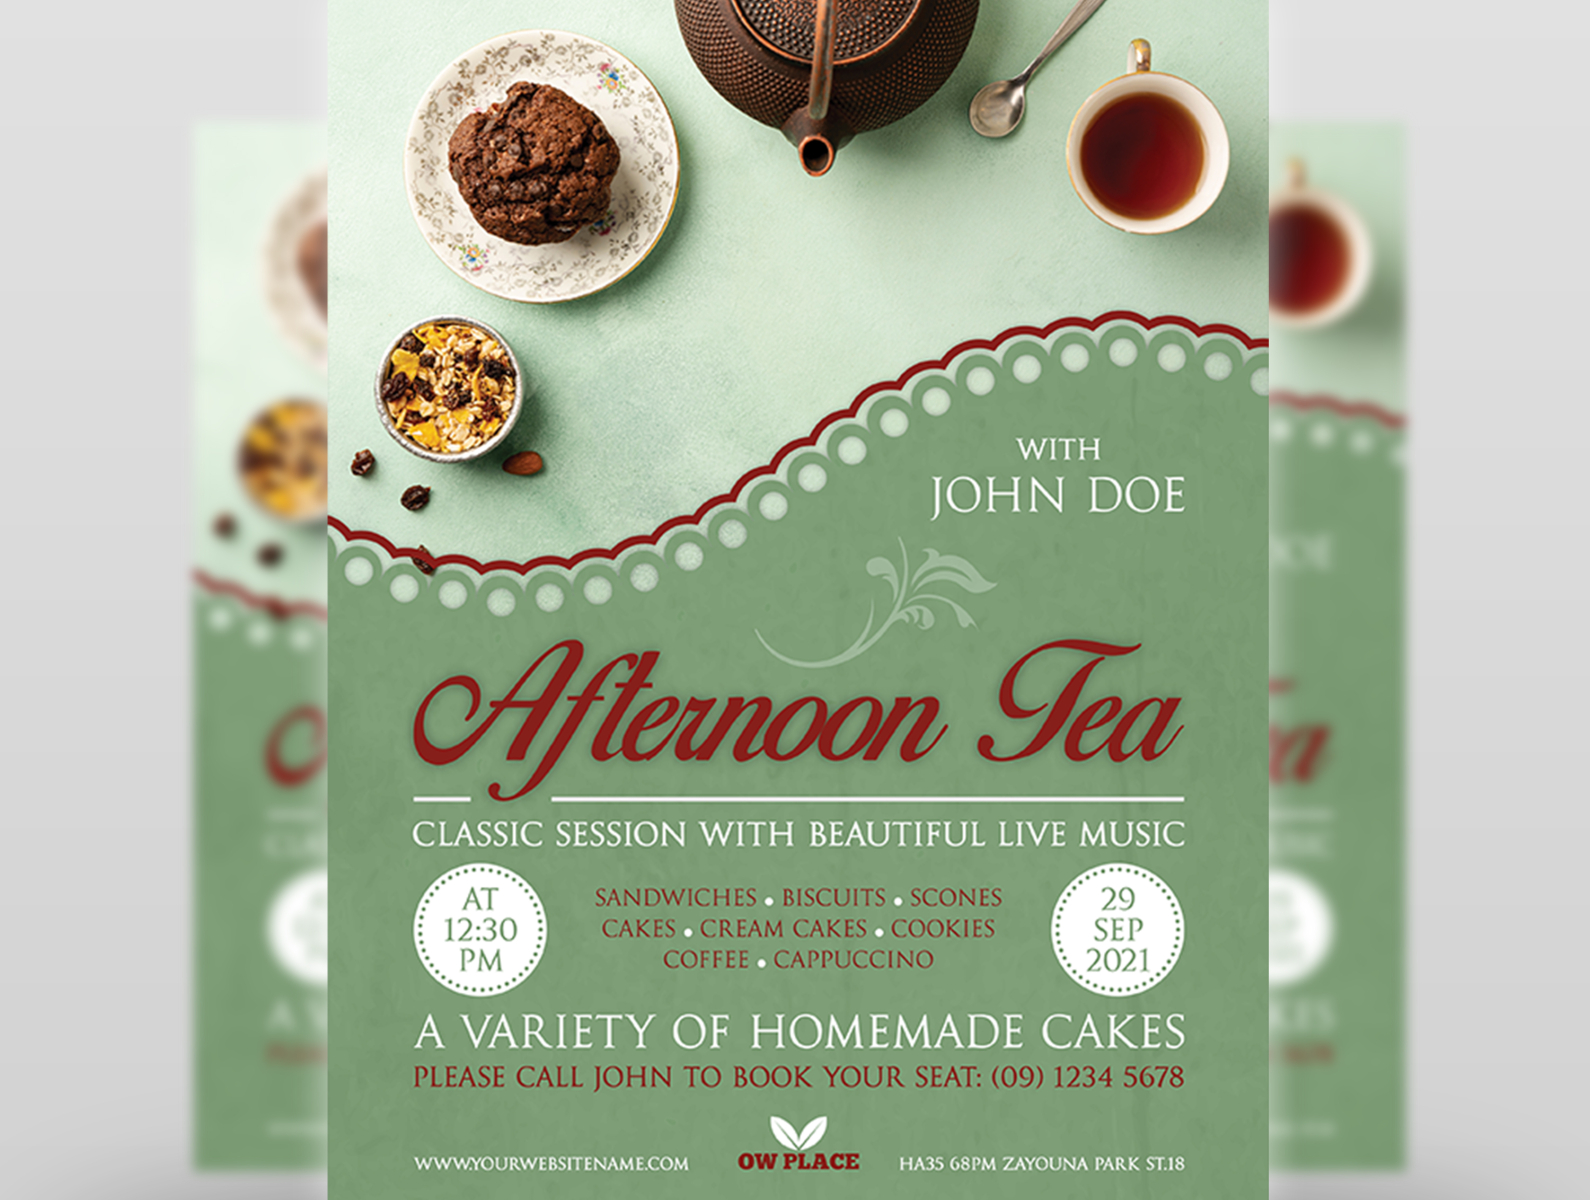 afternoon-tea-high-tea-party-flyer-template-by-owpictures-on-dribbble